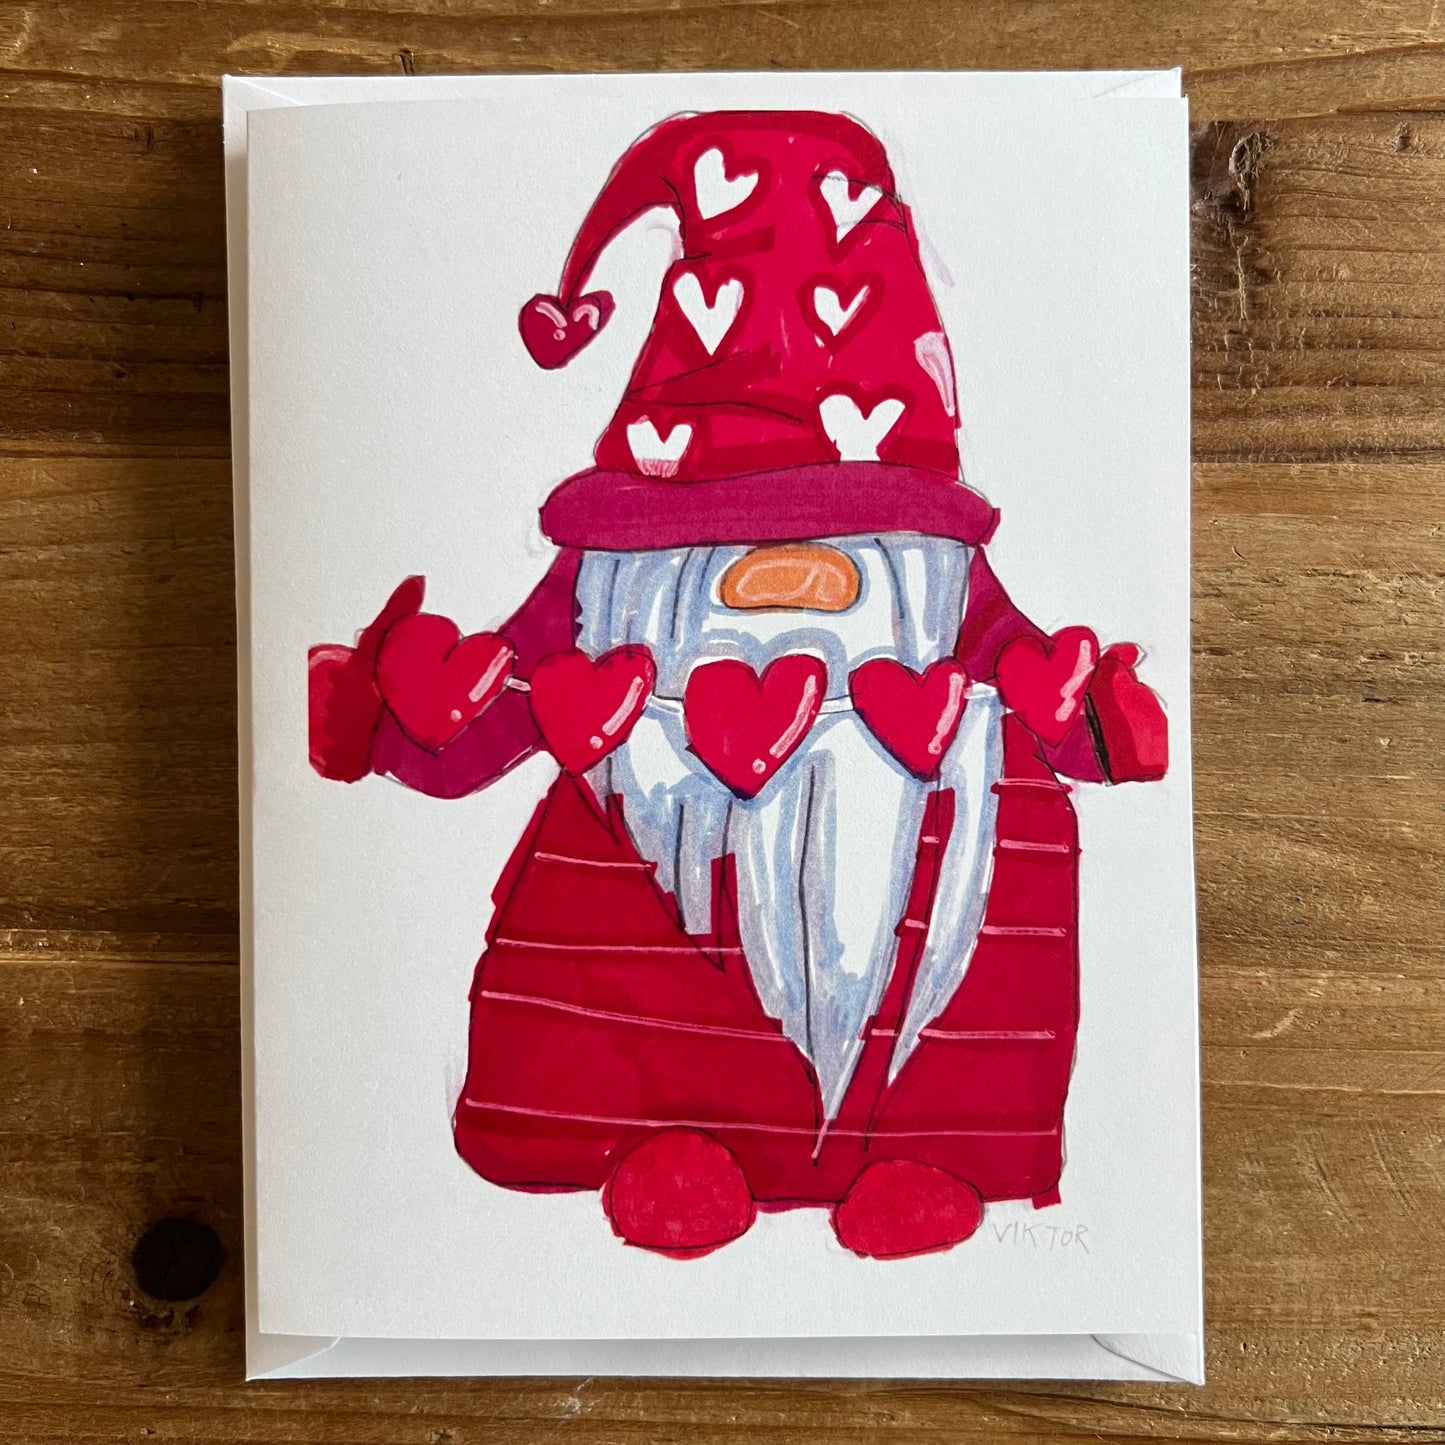 Share your Love with the Gnomes - Greeting cards in size 6.5x10” with mat finish